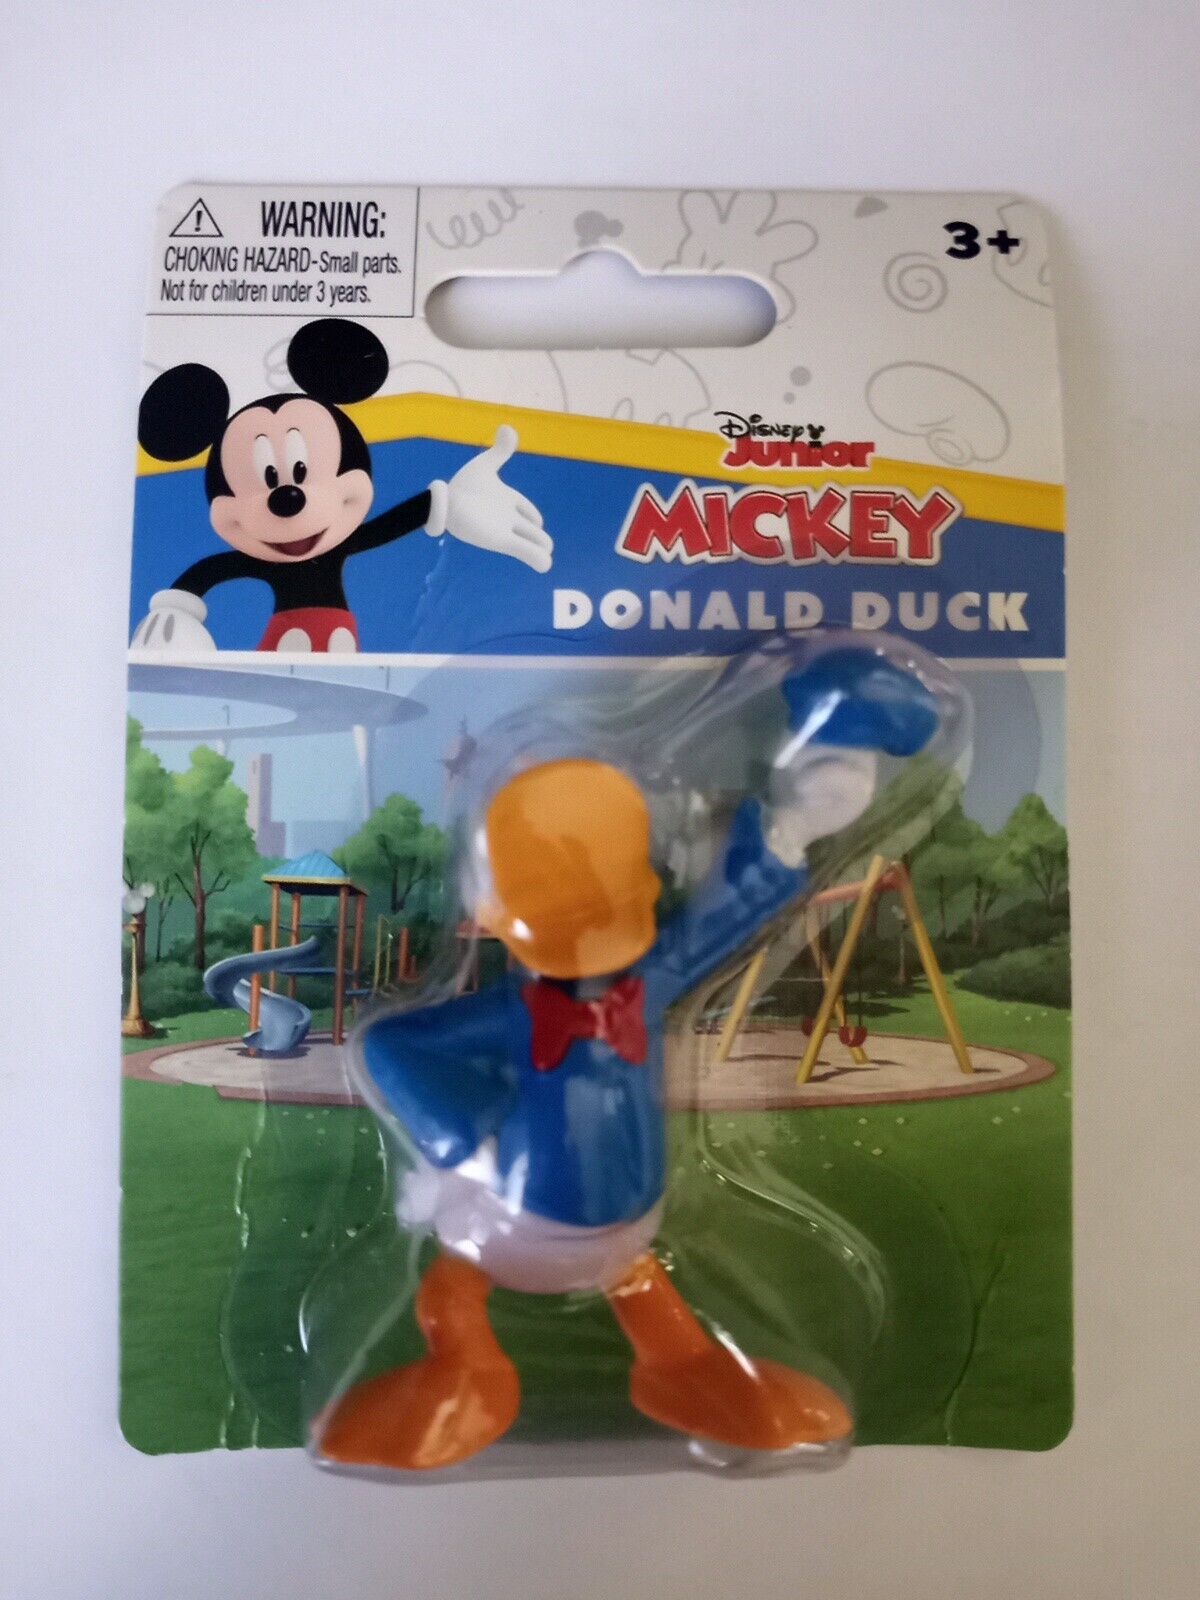 Disney's Junior Mickey's Donald Duck Miniature Toy Carded Blister Pack